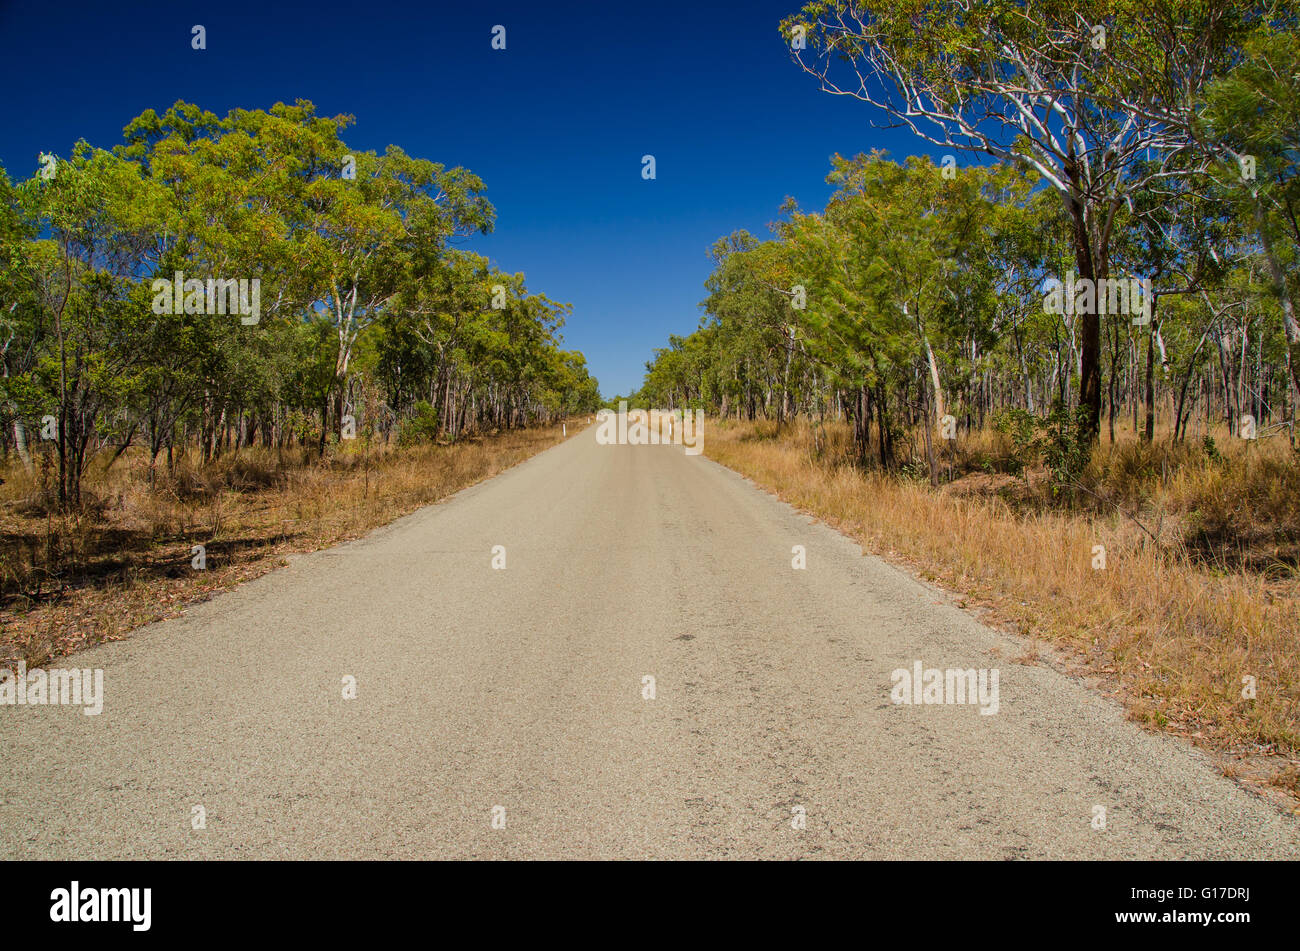 Road in the outback, Qld., Australia. Stock Photo